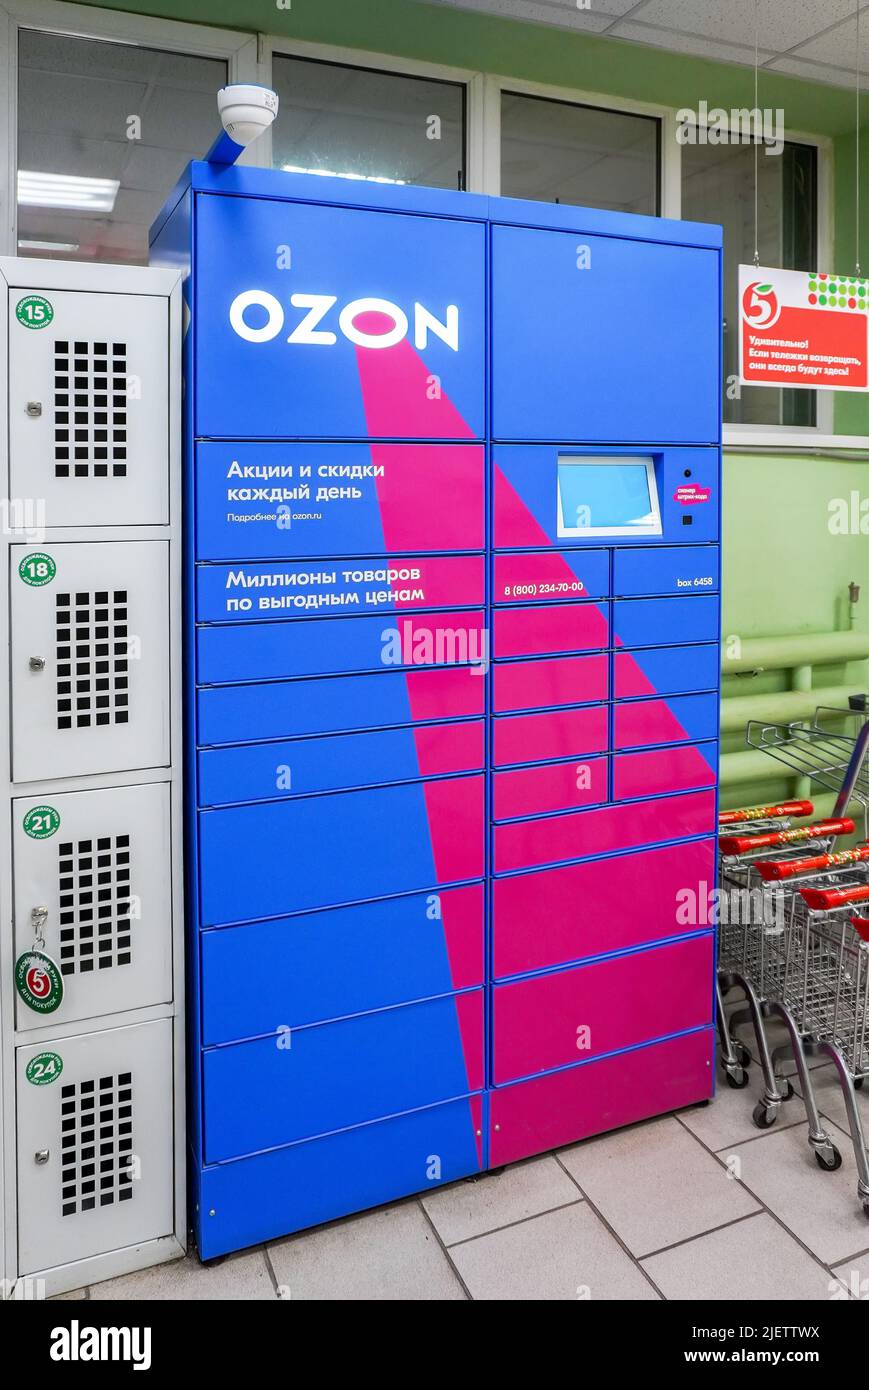 Samara, Russia - June 27, 2022: Pick-up point of the OZON locker. Postamat OZON - Large online store in Russia Stock Photo